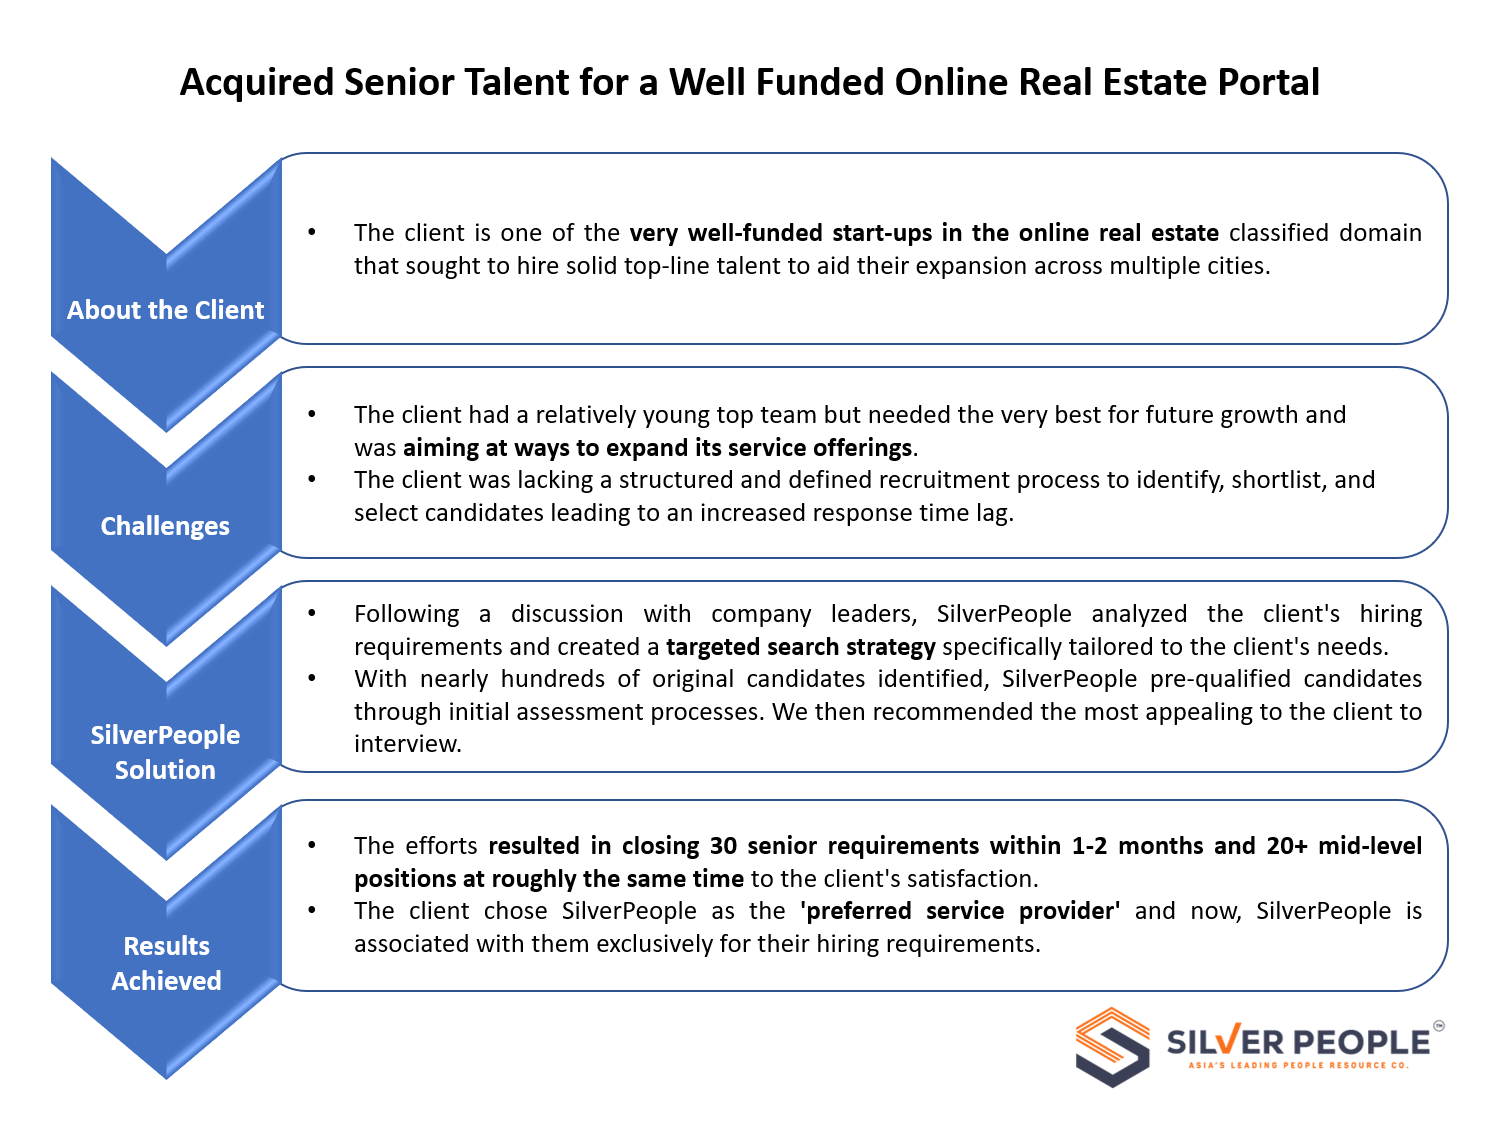 Acquired Senior Talent for a Well Funded Online Real Estate Portal